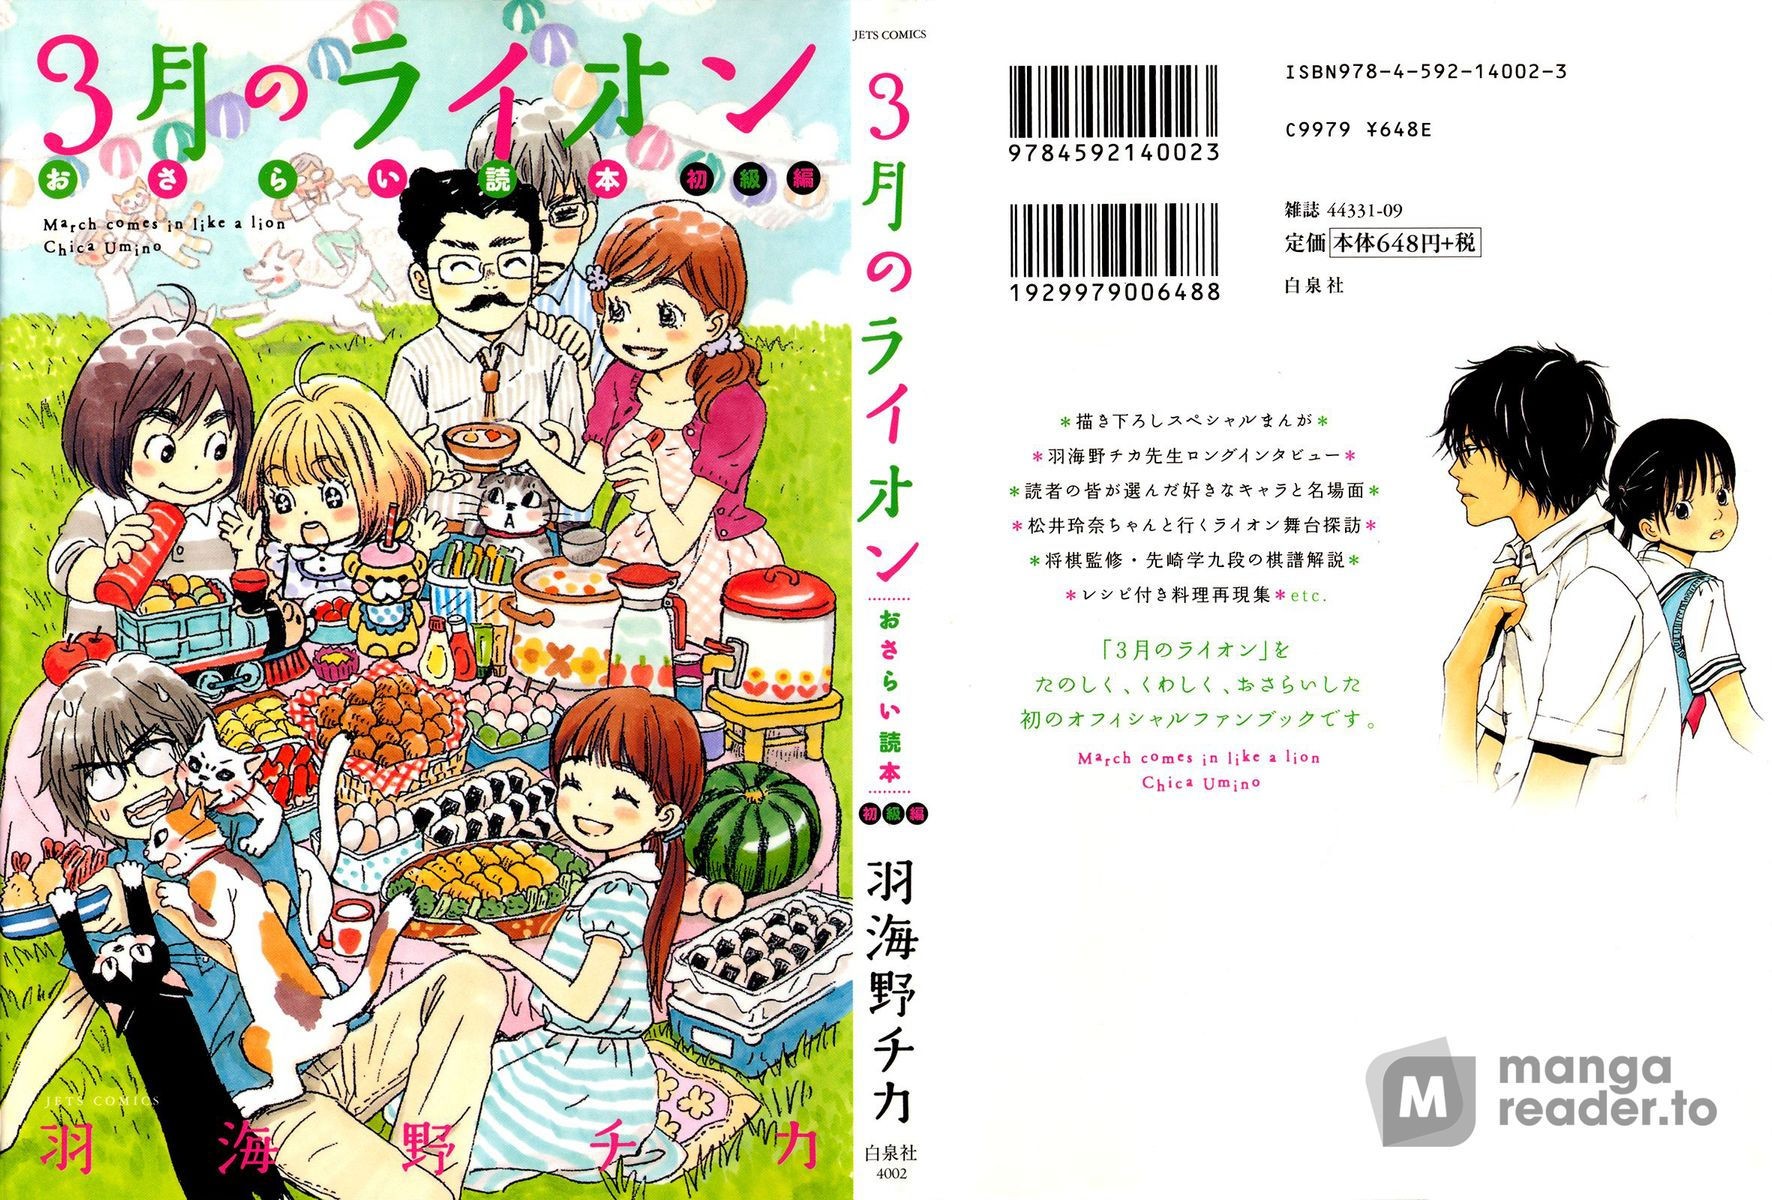 March Comes in Like a Lion, Chapter 94.5 Vol 9 Extra (EN) image 01